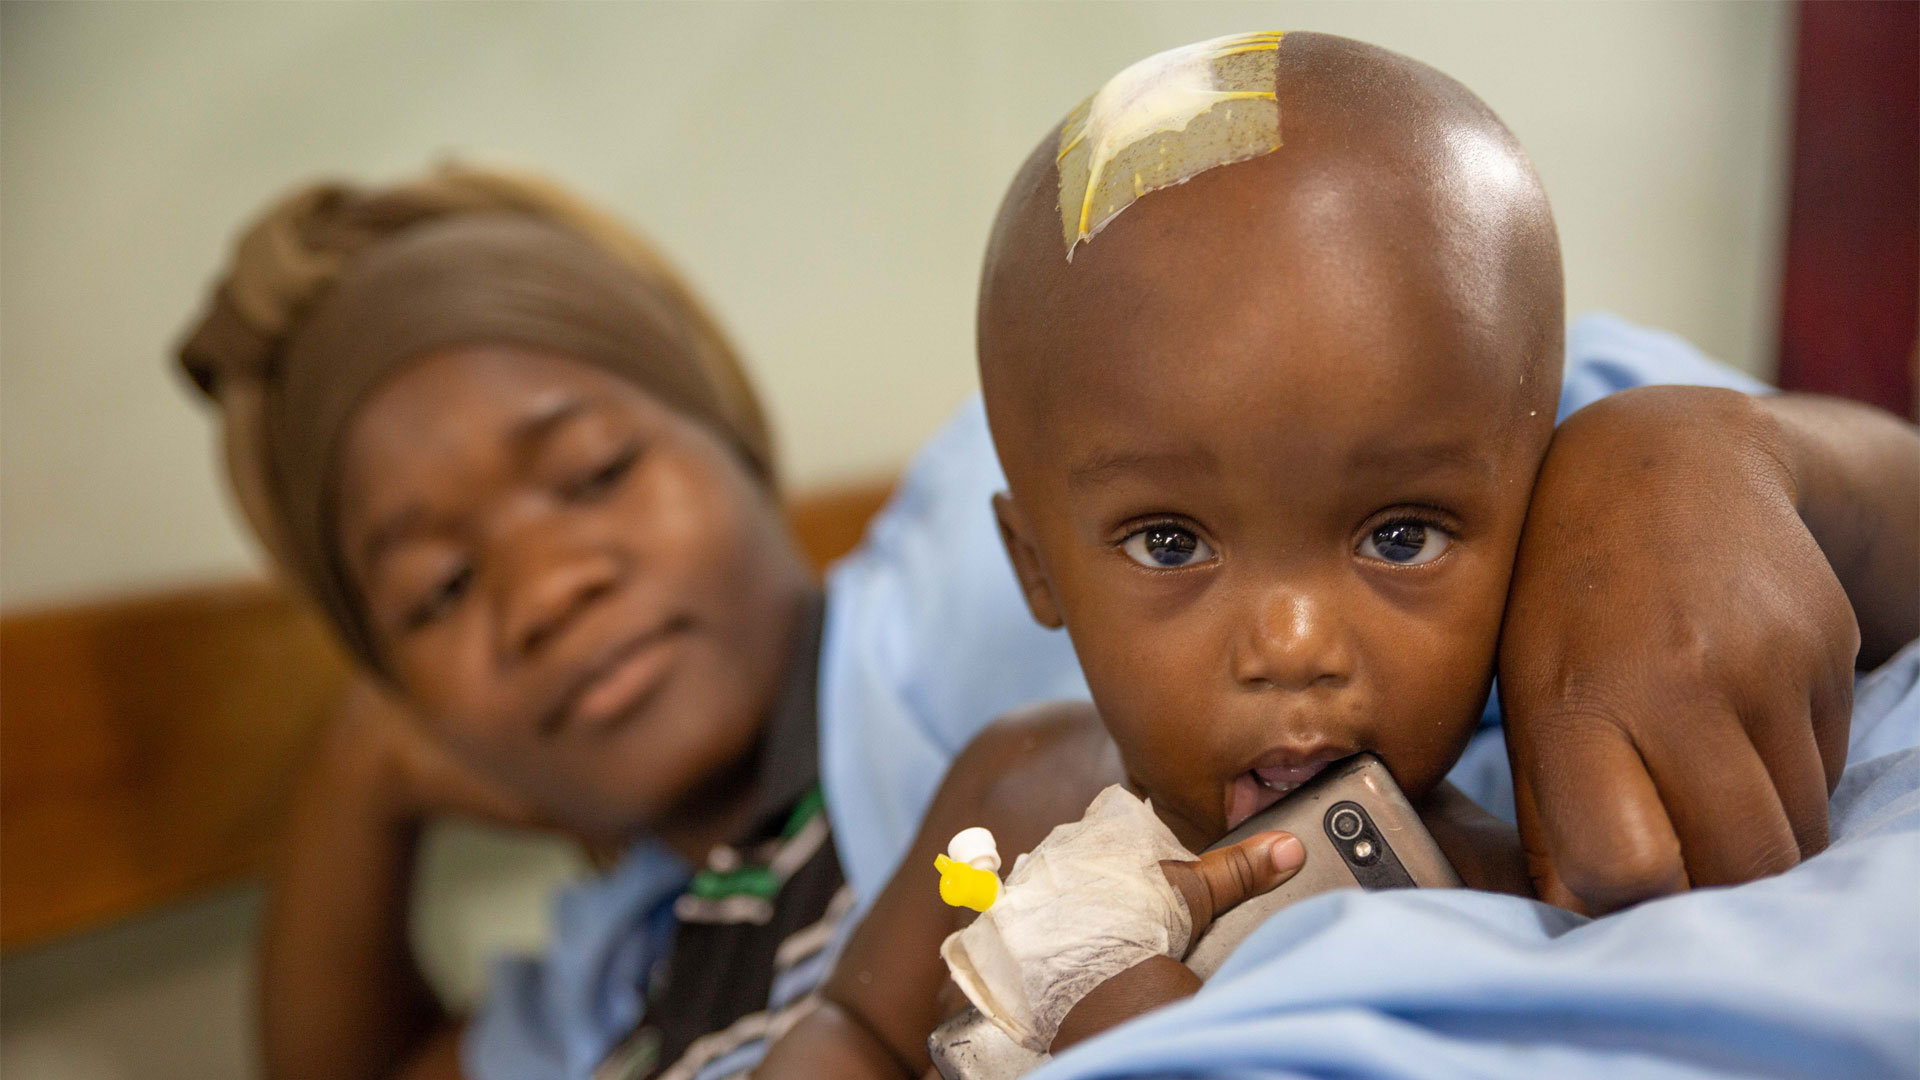 Pediatric Hydrocephalus in East Africa: Prevalence, Causes, Treatments, and Strategies for the Future